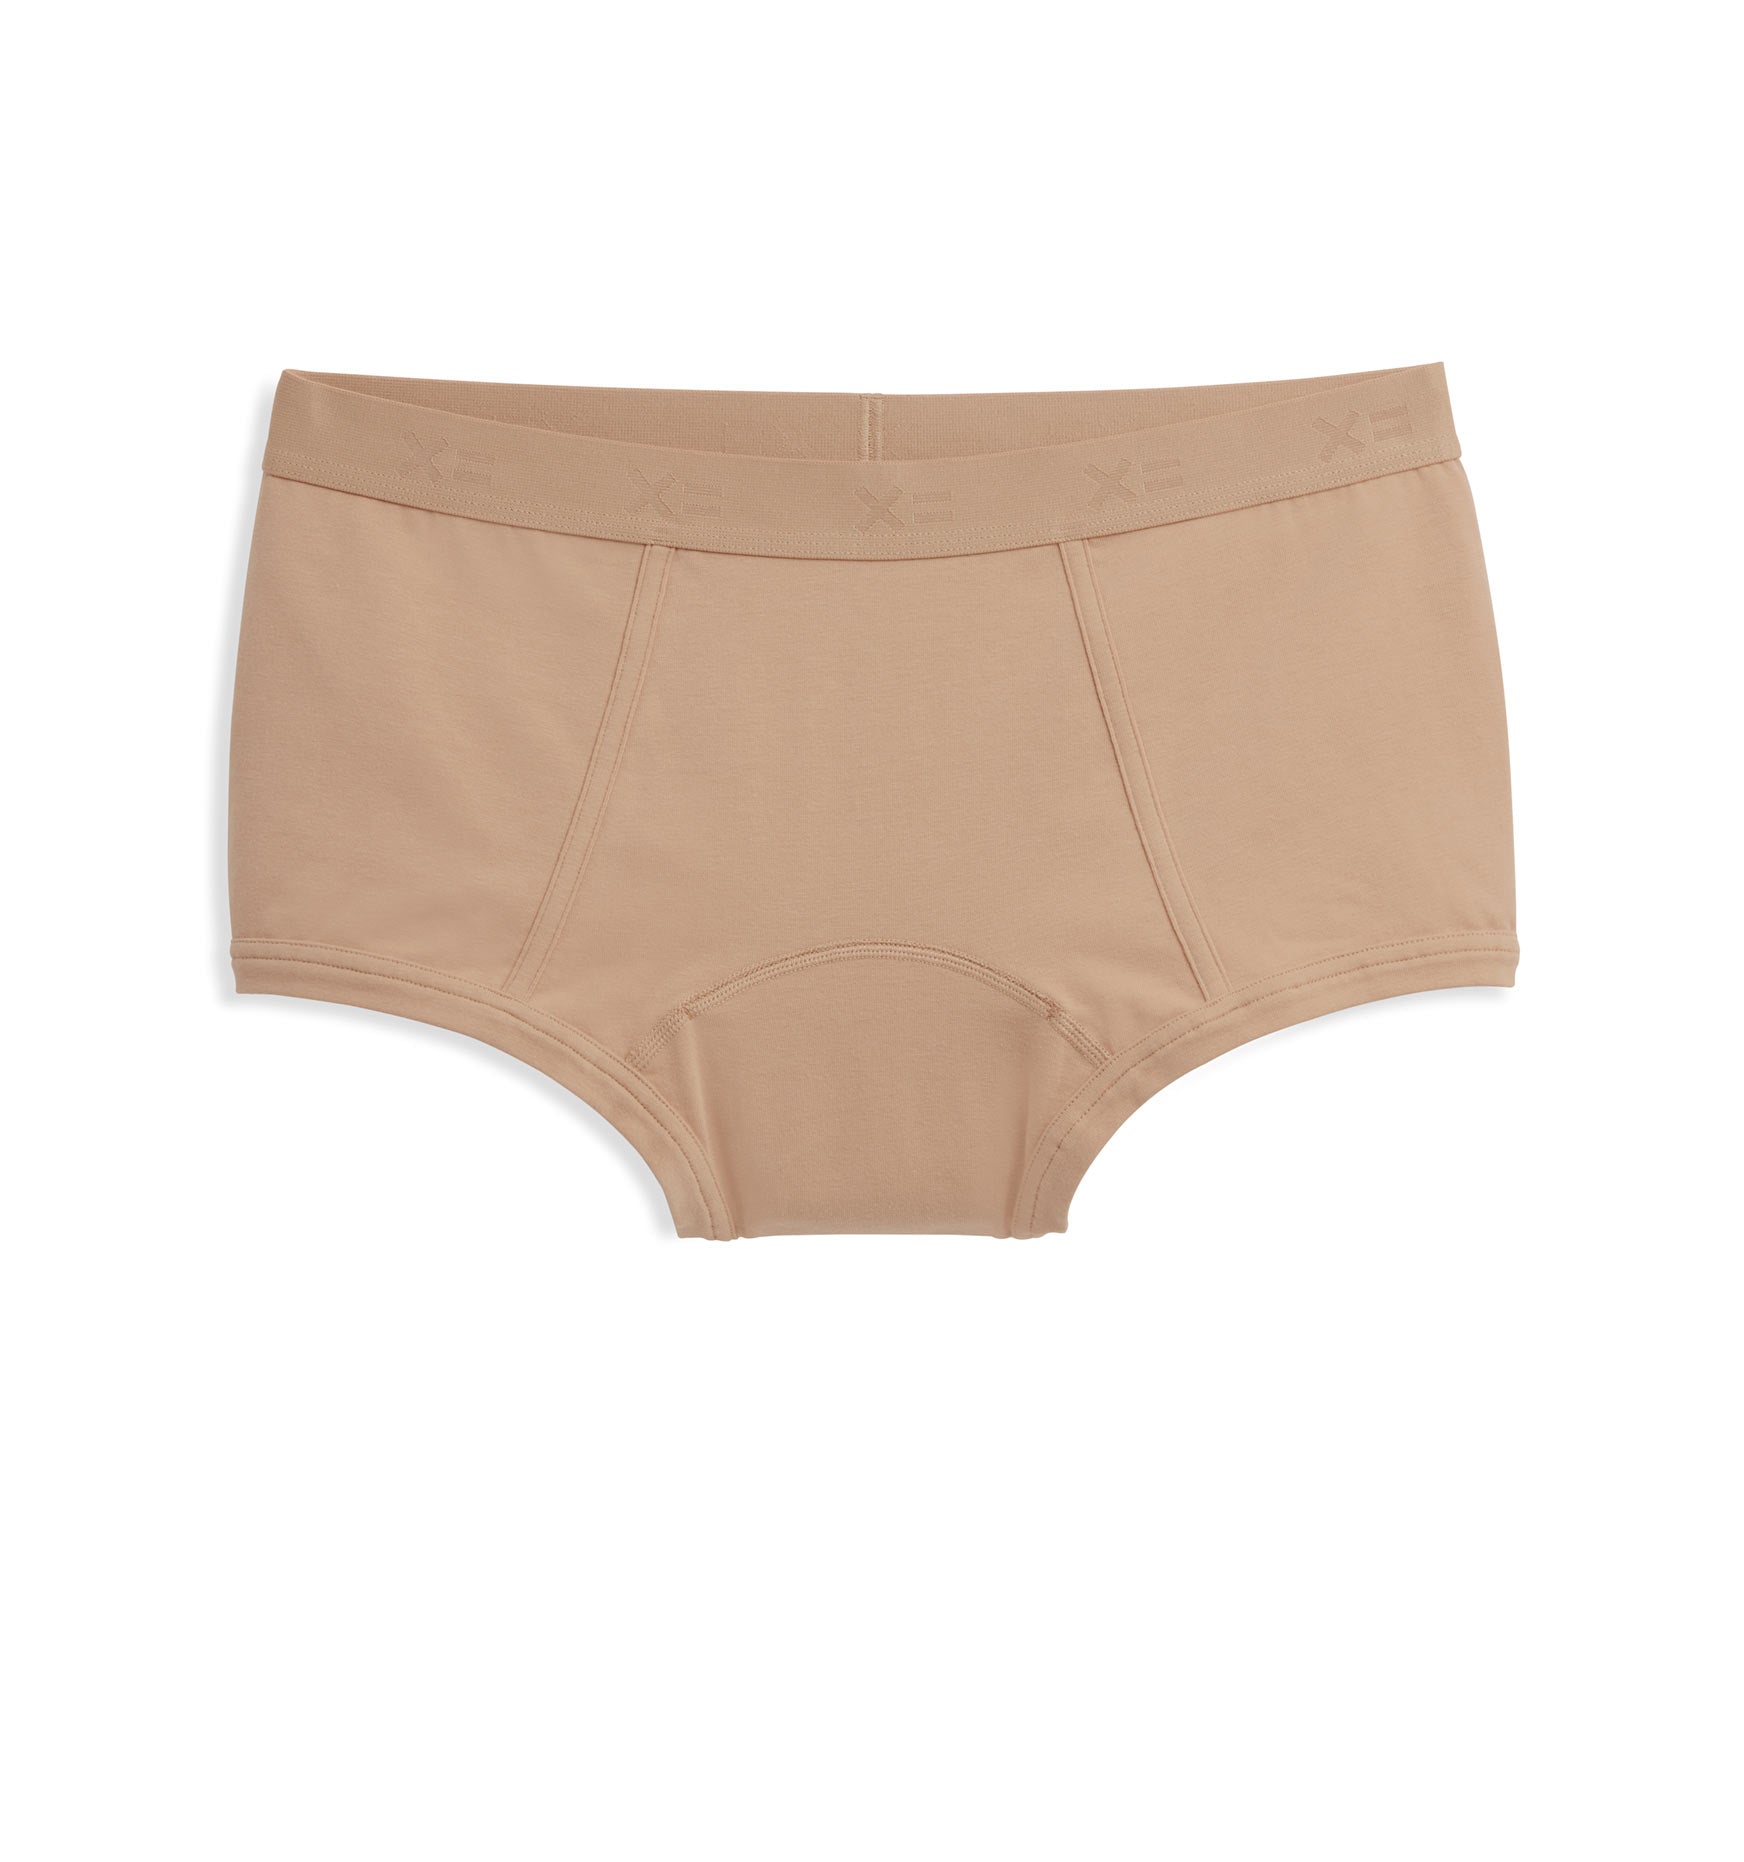 TomboyX Boy Shorts Underwear, Micromodal Stretchy and Soft All